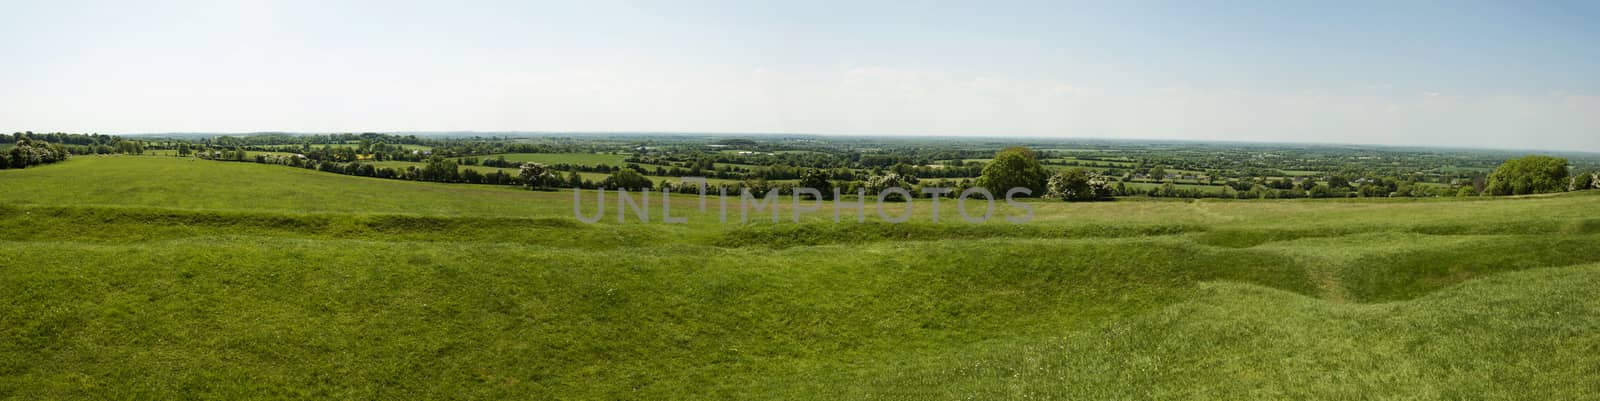 The Hill of Tara, located near the River Boyne, is an archaeological complex that runs between Navan and Dunshaughlin in County Meath, Ireland. It contains a number of ancient monuments, and according to tradition, was the seat of the High King of Ireland.